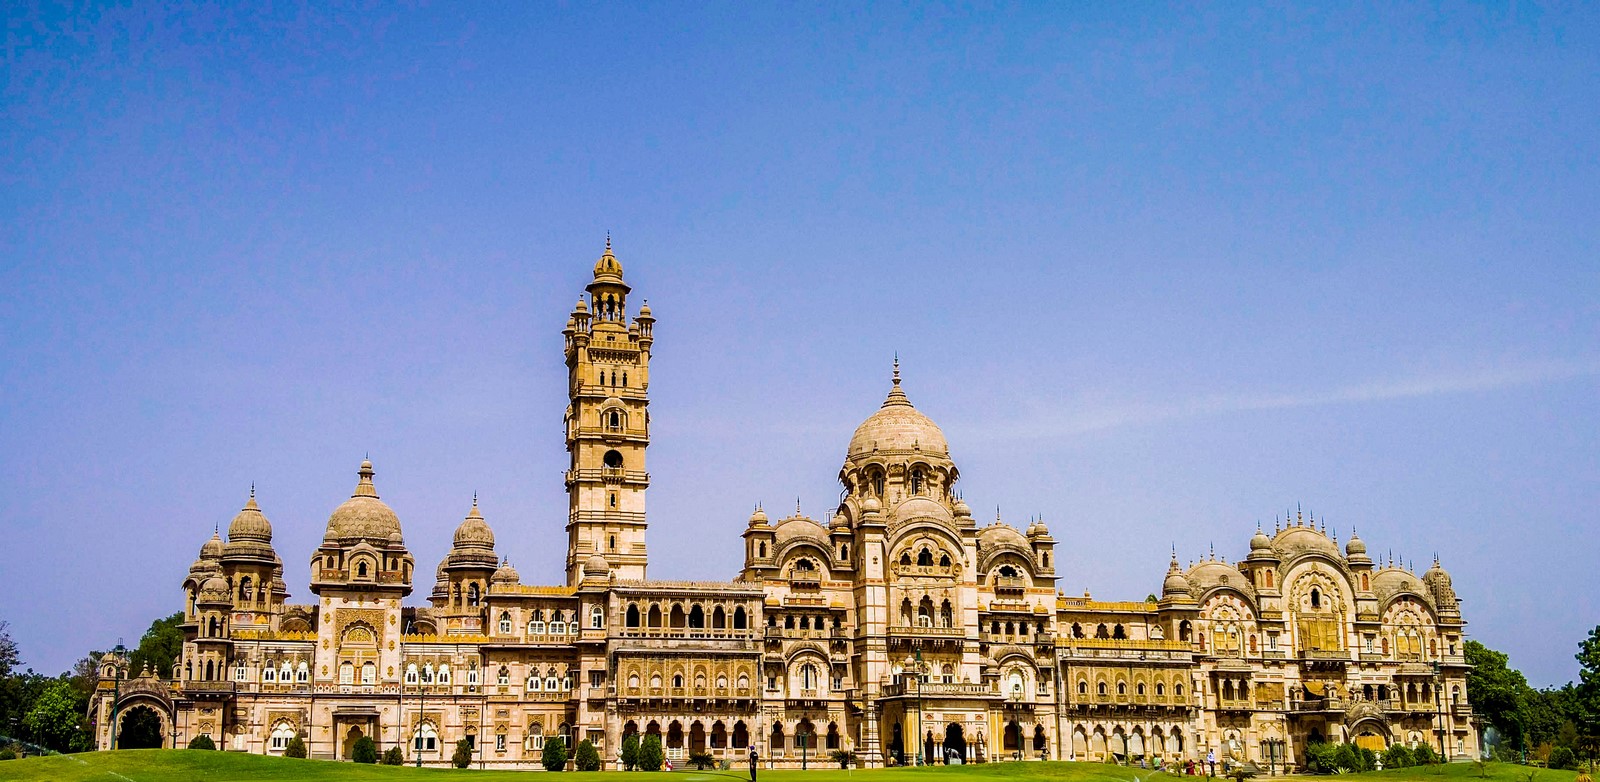 15 Places to Visit in Vadodara for Travelling Architect - SHeet1